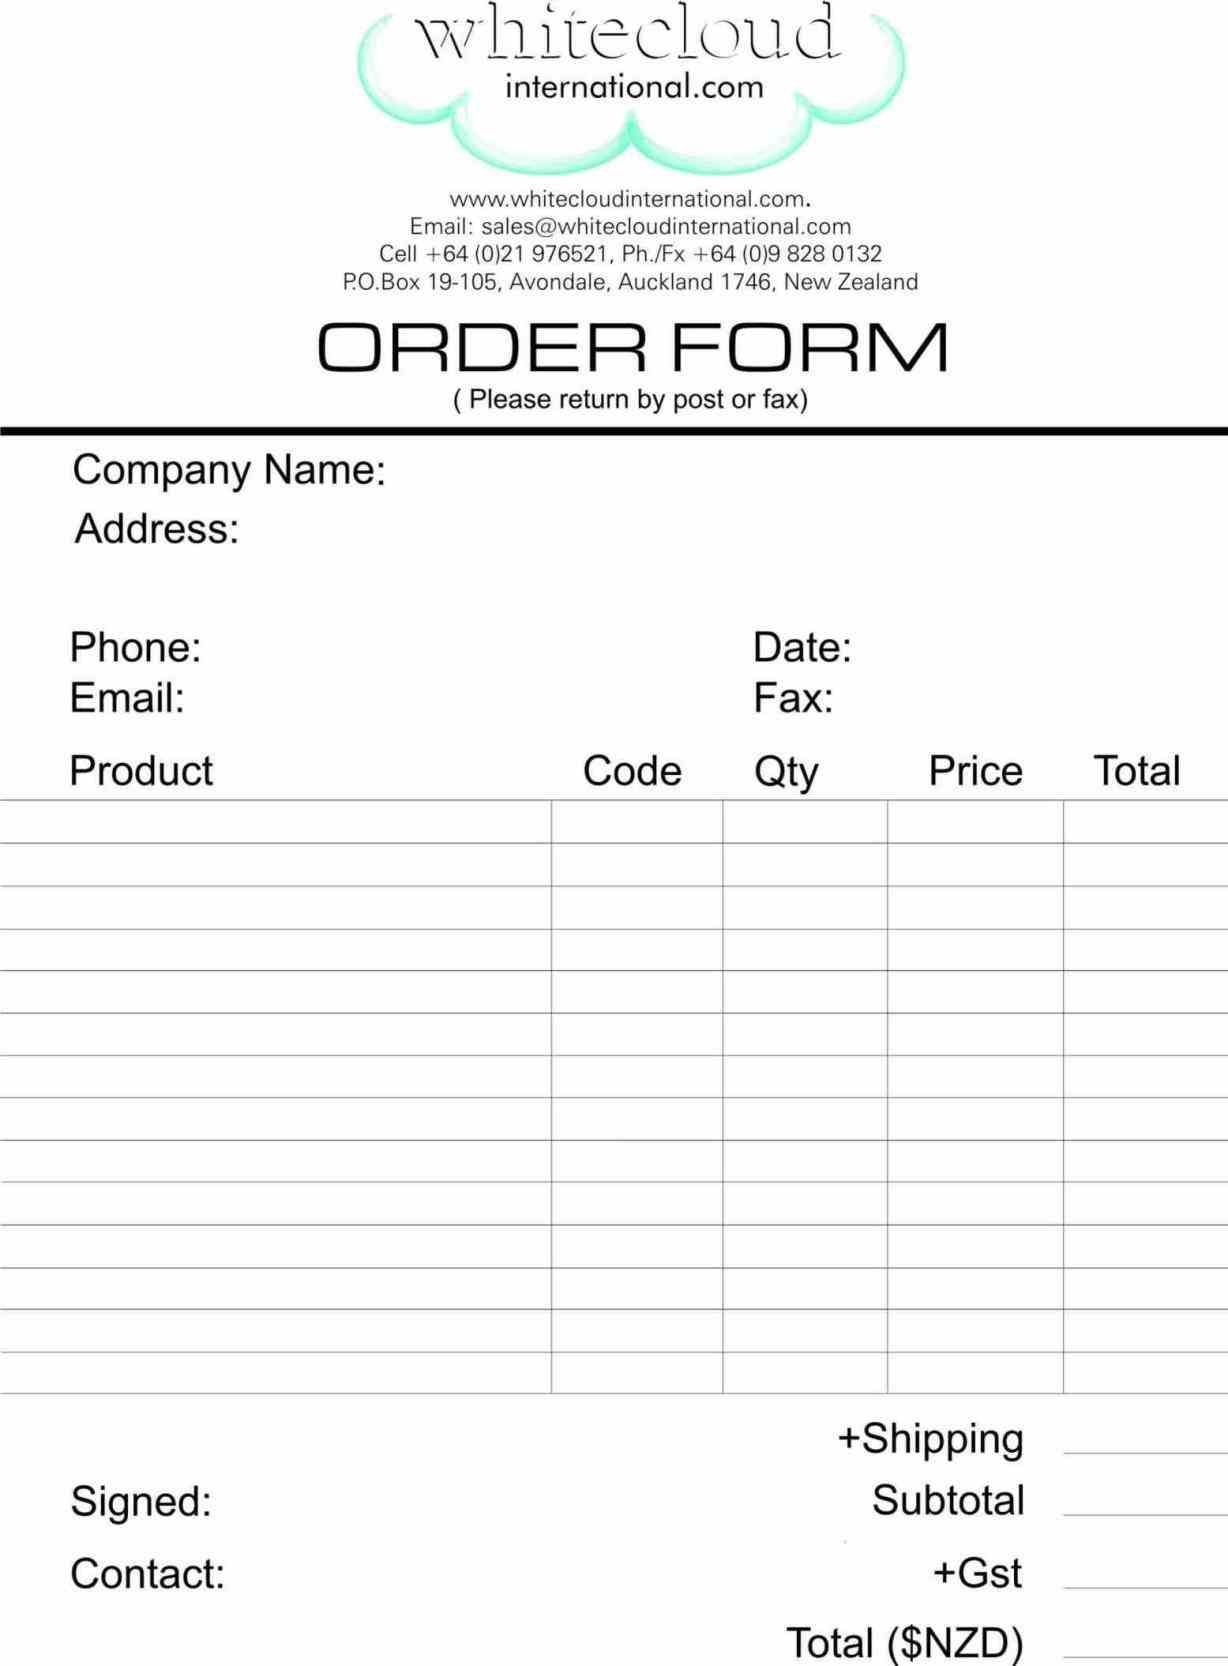 Insertion order template awesome purchase order form templates